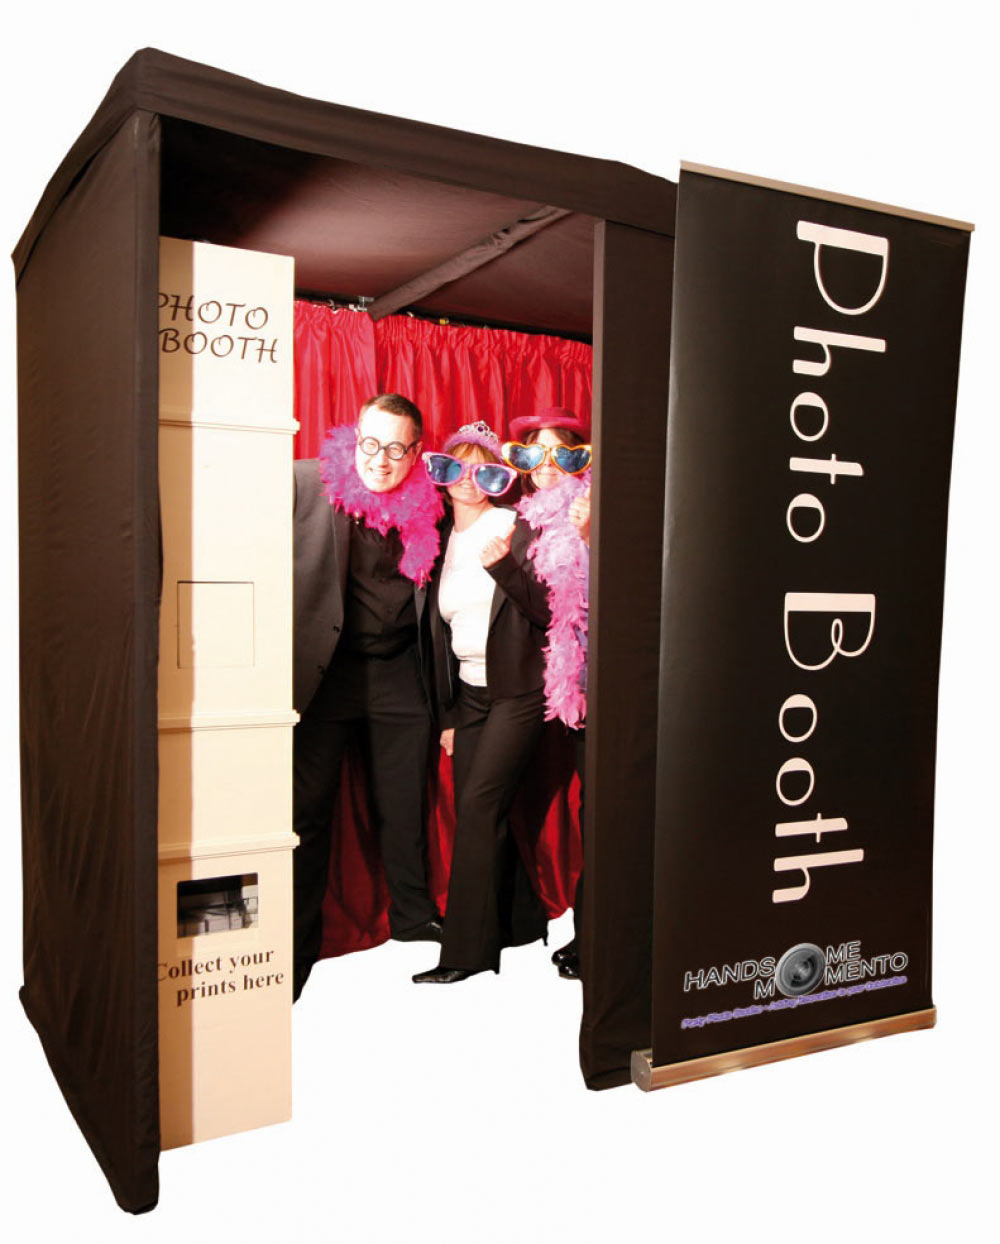 Handsome Momento Photo Booth